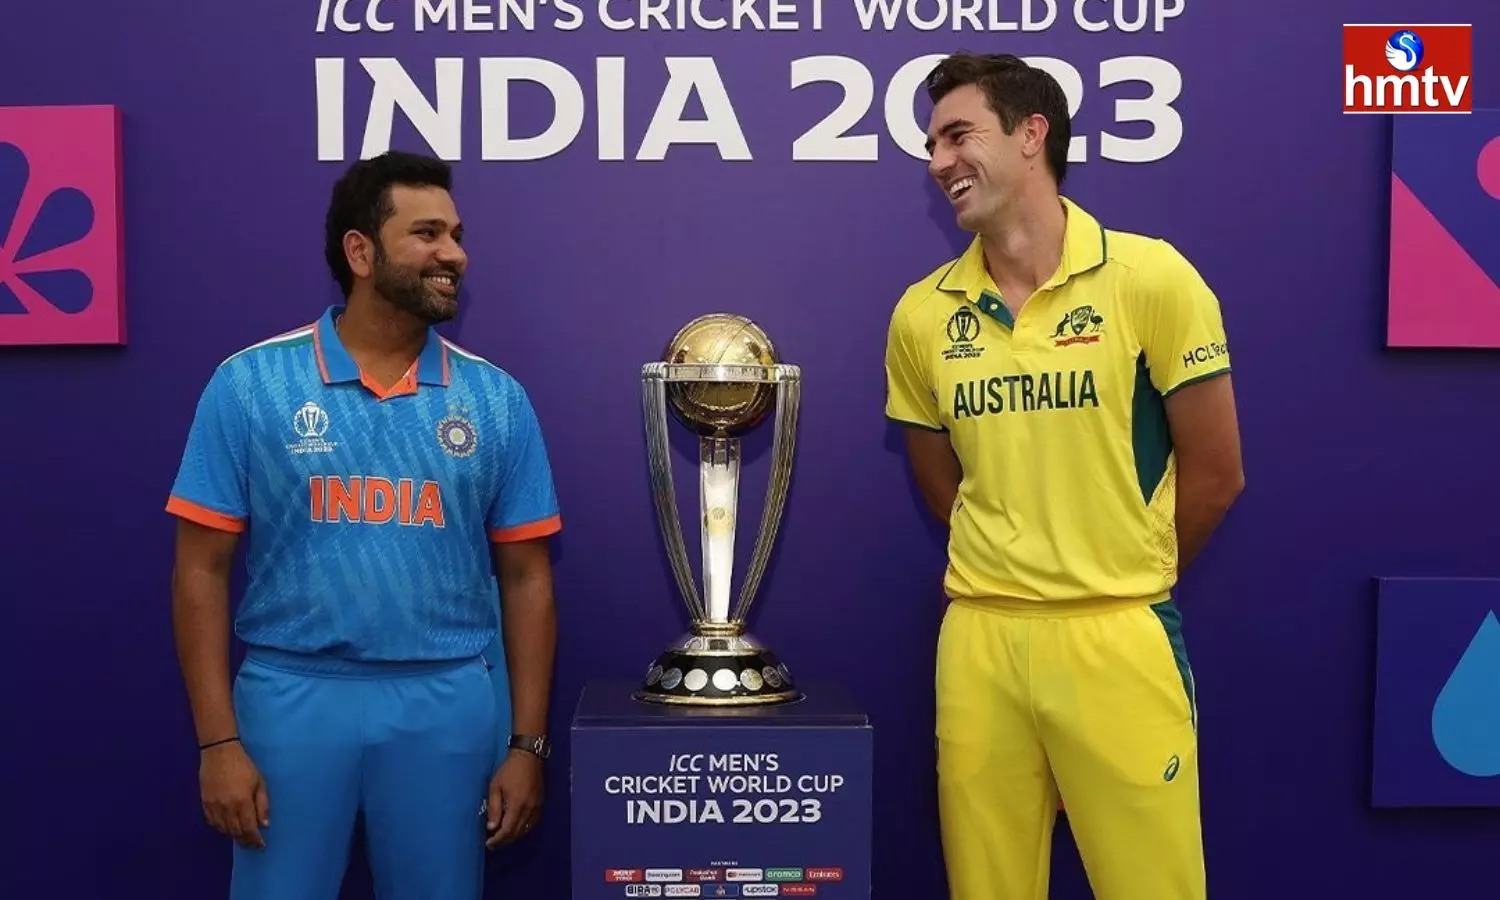 Australia Wins The Toss And Choose To Bat First Against India